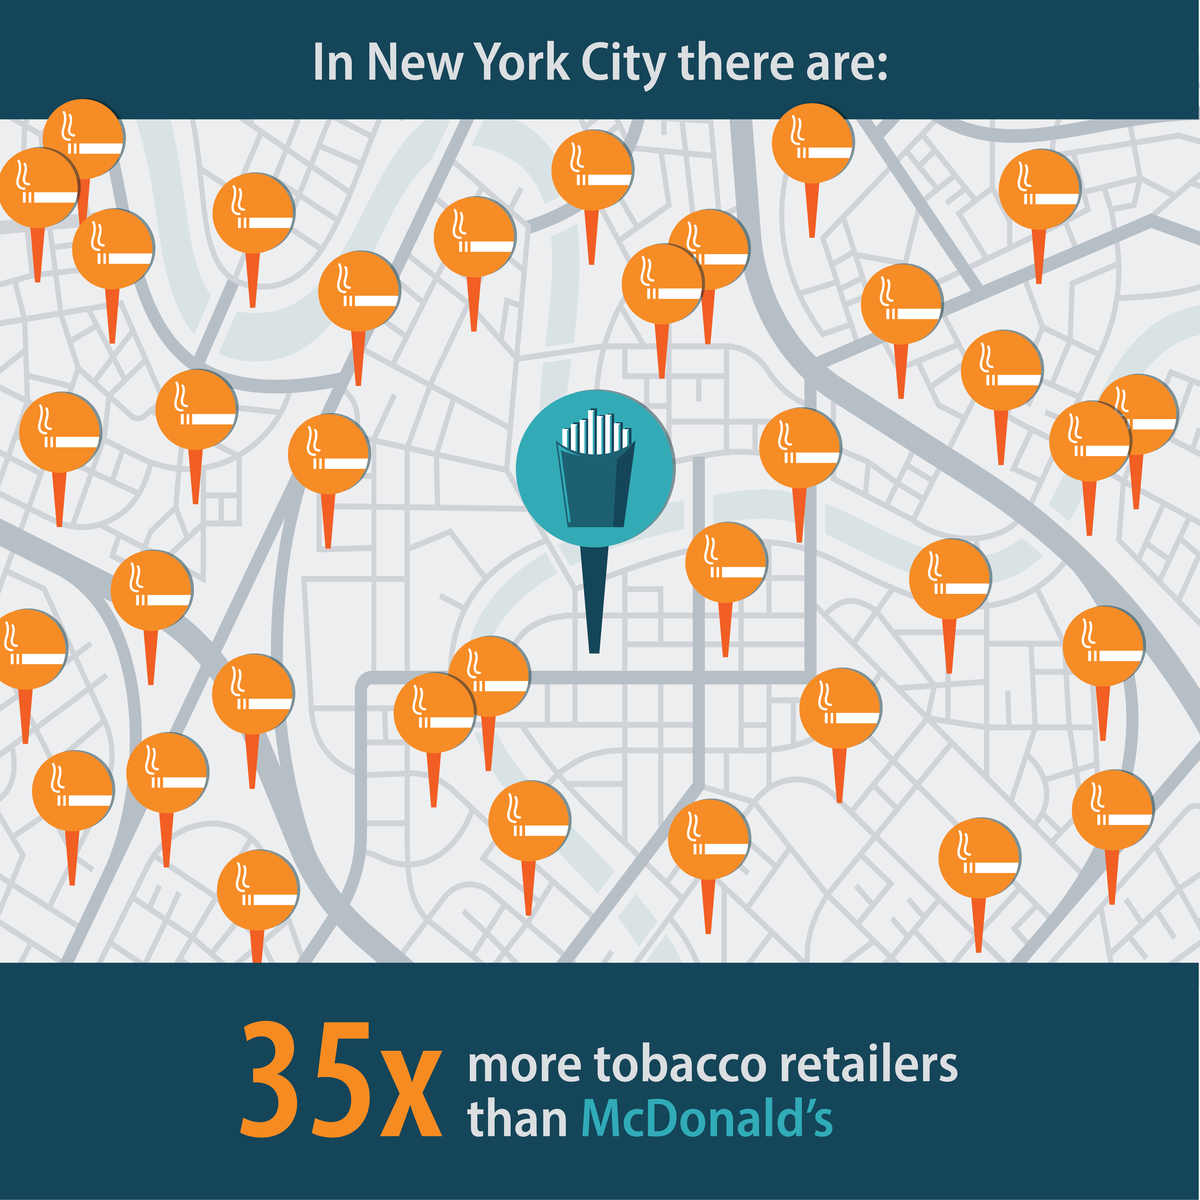 In New York City there are: 35 times more tobacco retailers than McDonald's